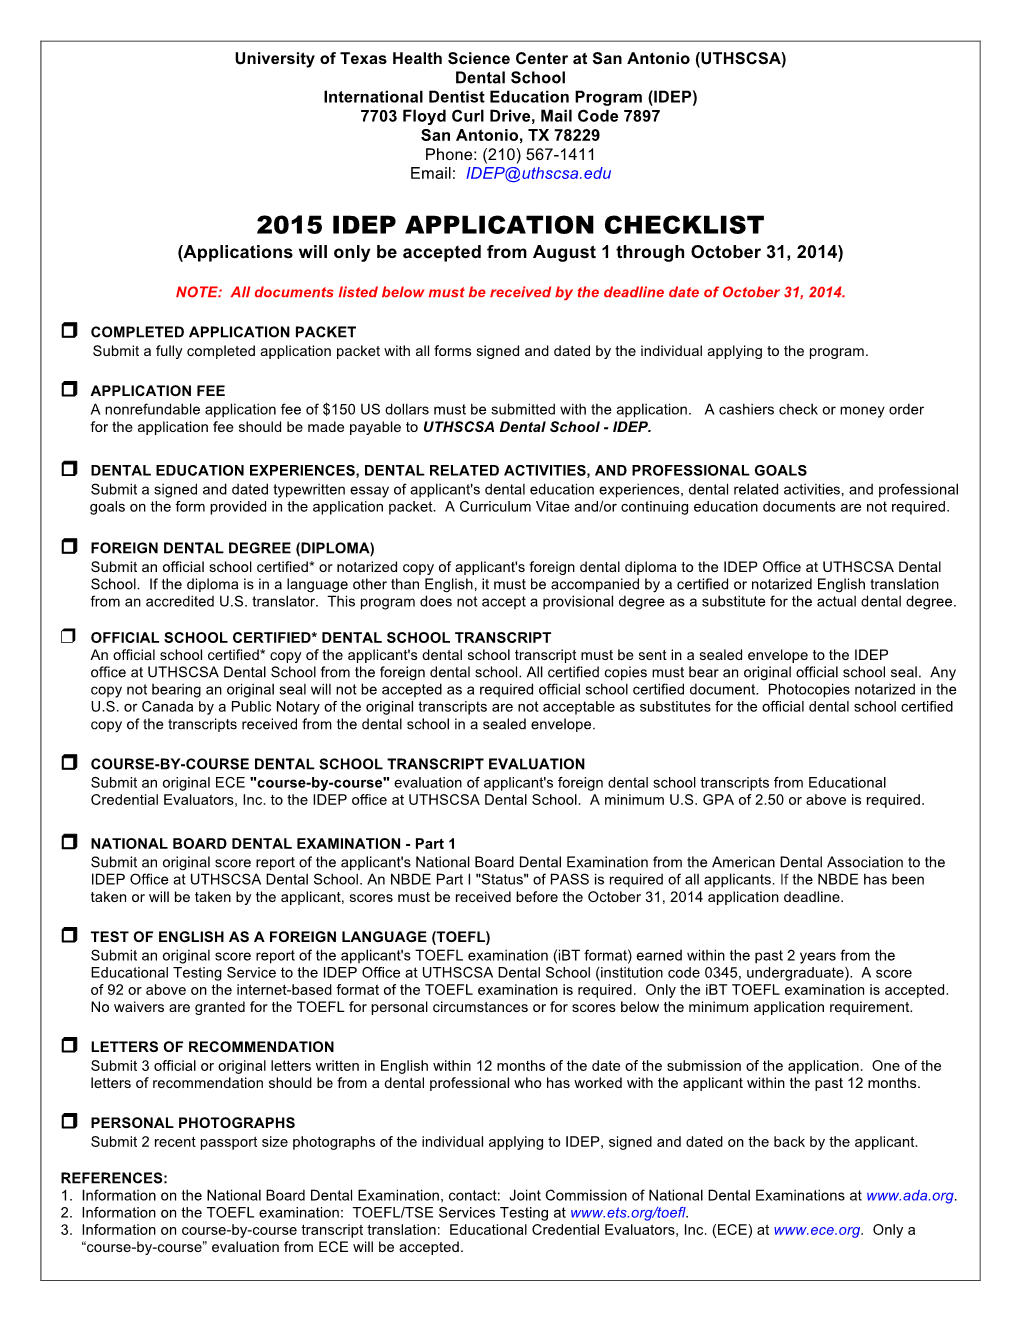 2015 IDEP APPLICATION CHECKLIST (Applications Will Only Be Accepted from August 1 Through October 31, 2014)